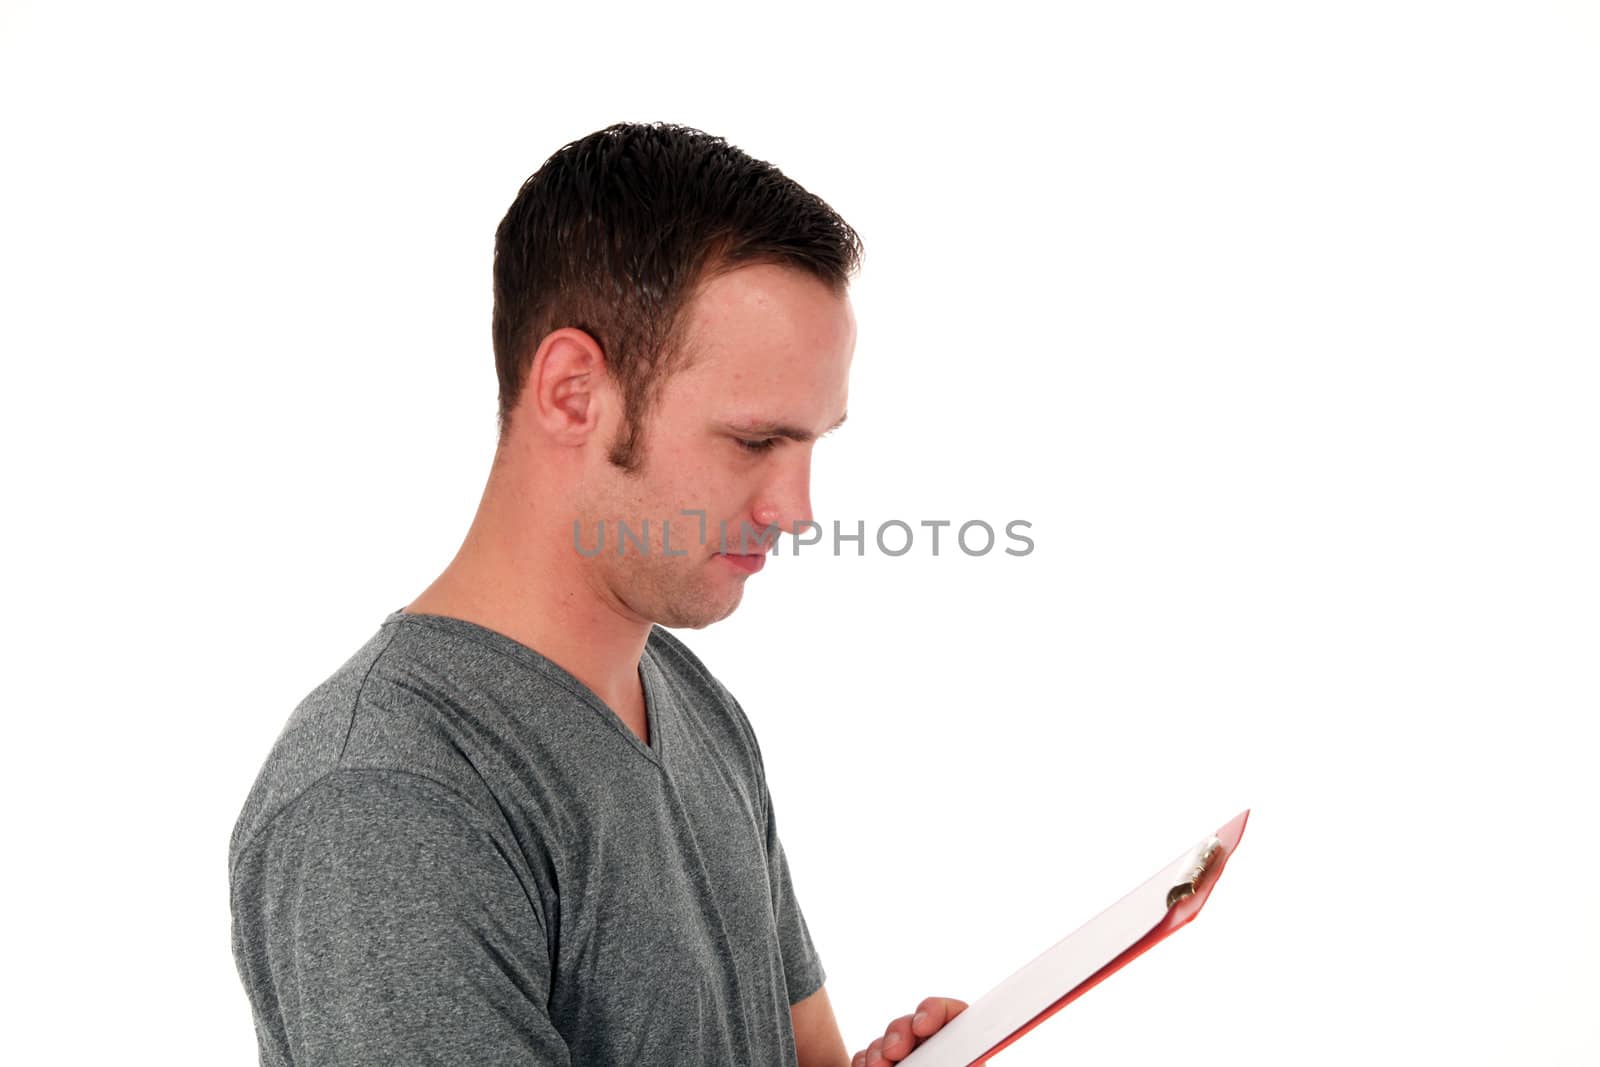 Upper body portrait of a young man in a casual t-shirt standing sideways reading notes on a clipboard isolated on white